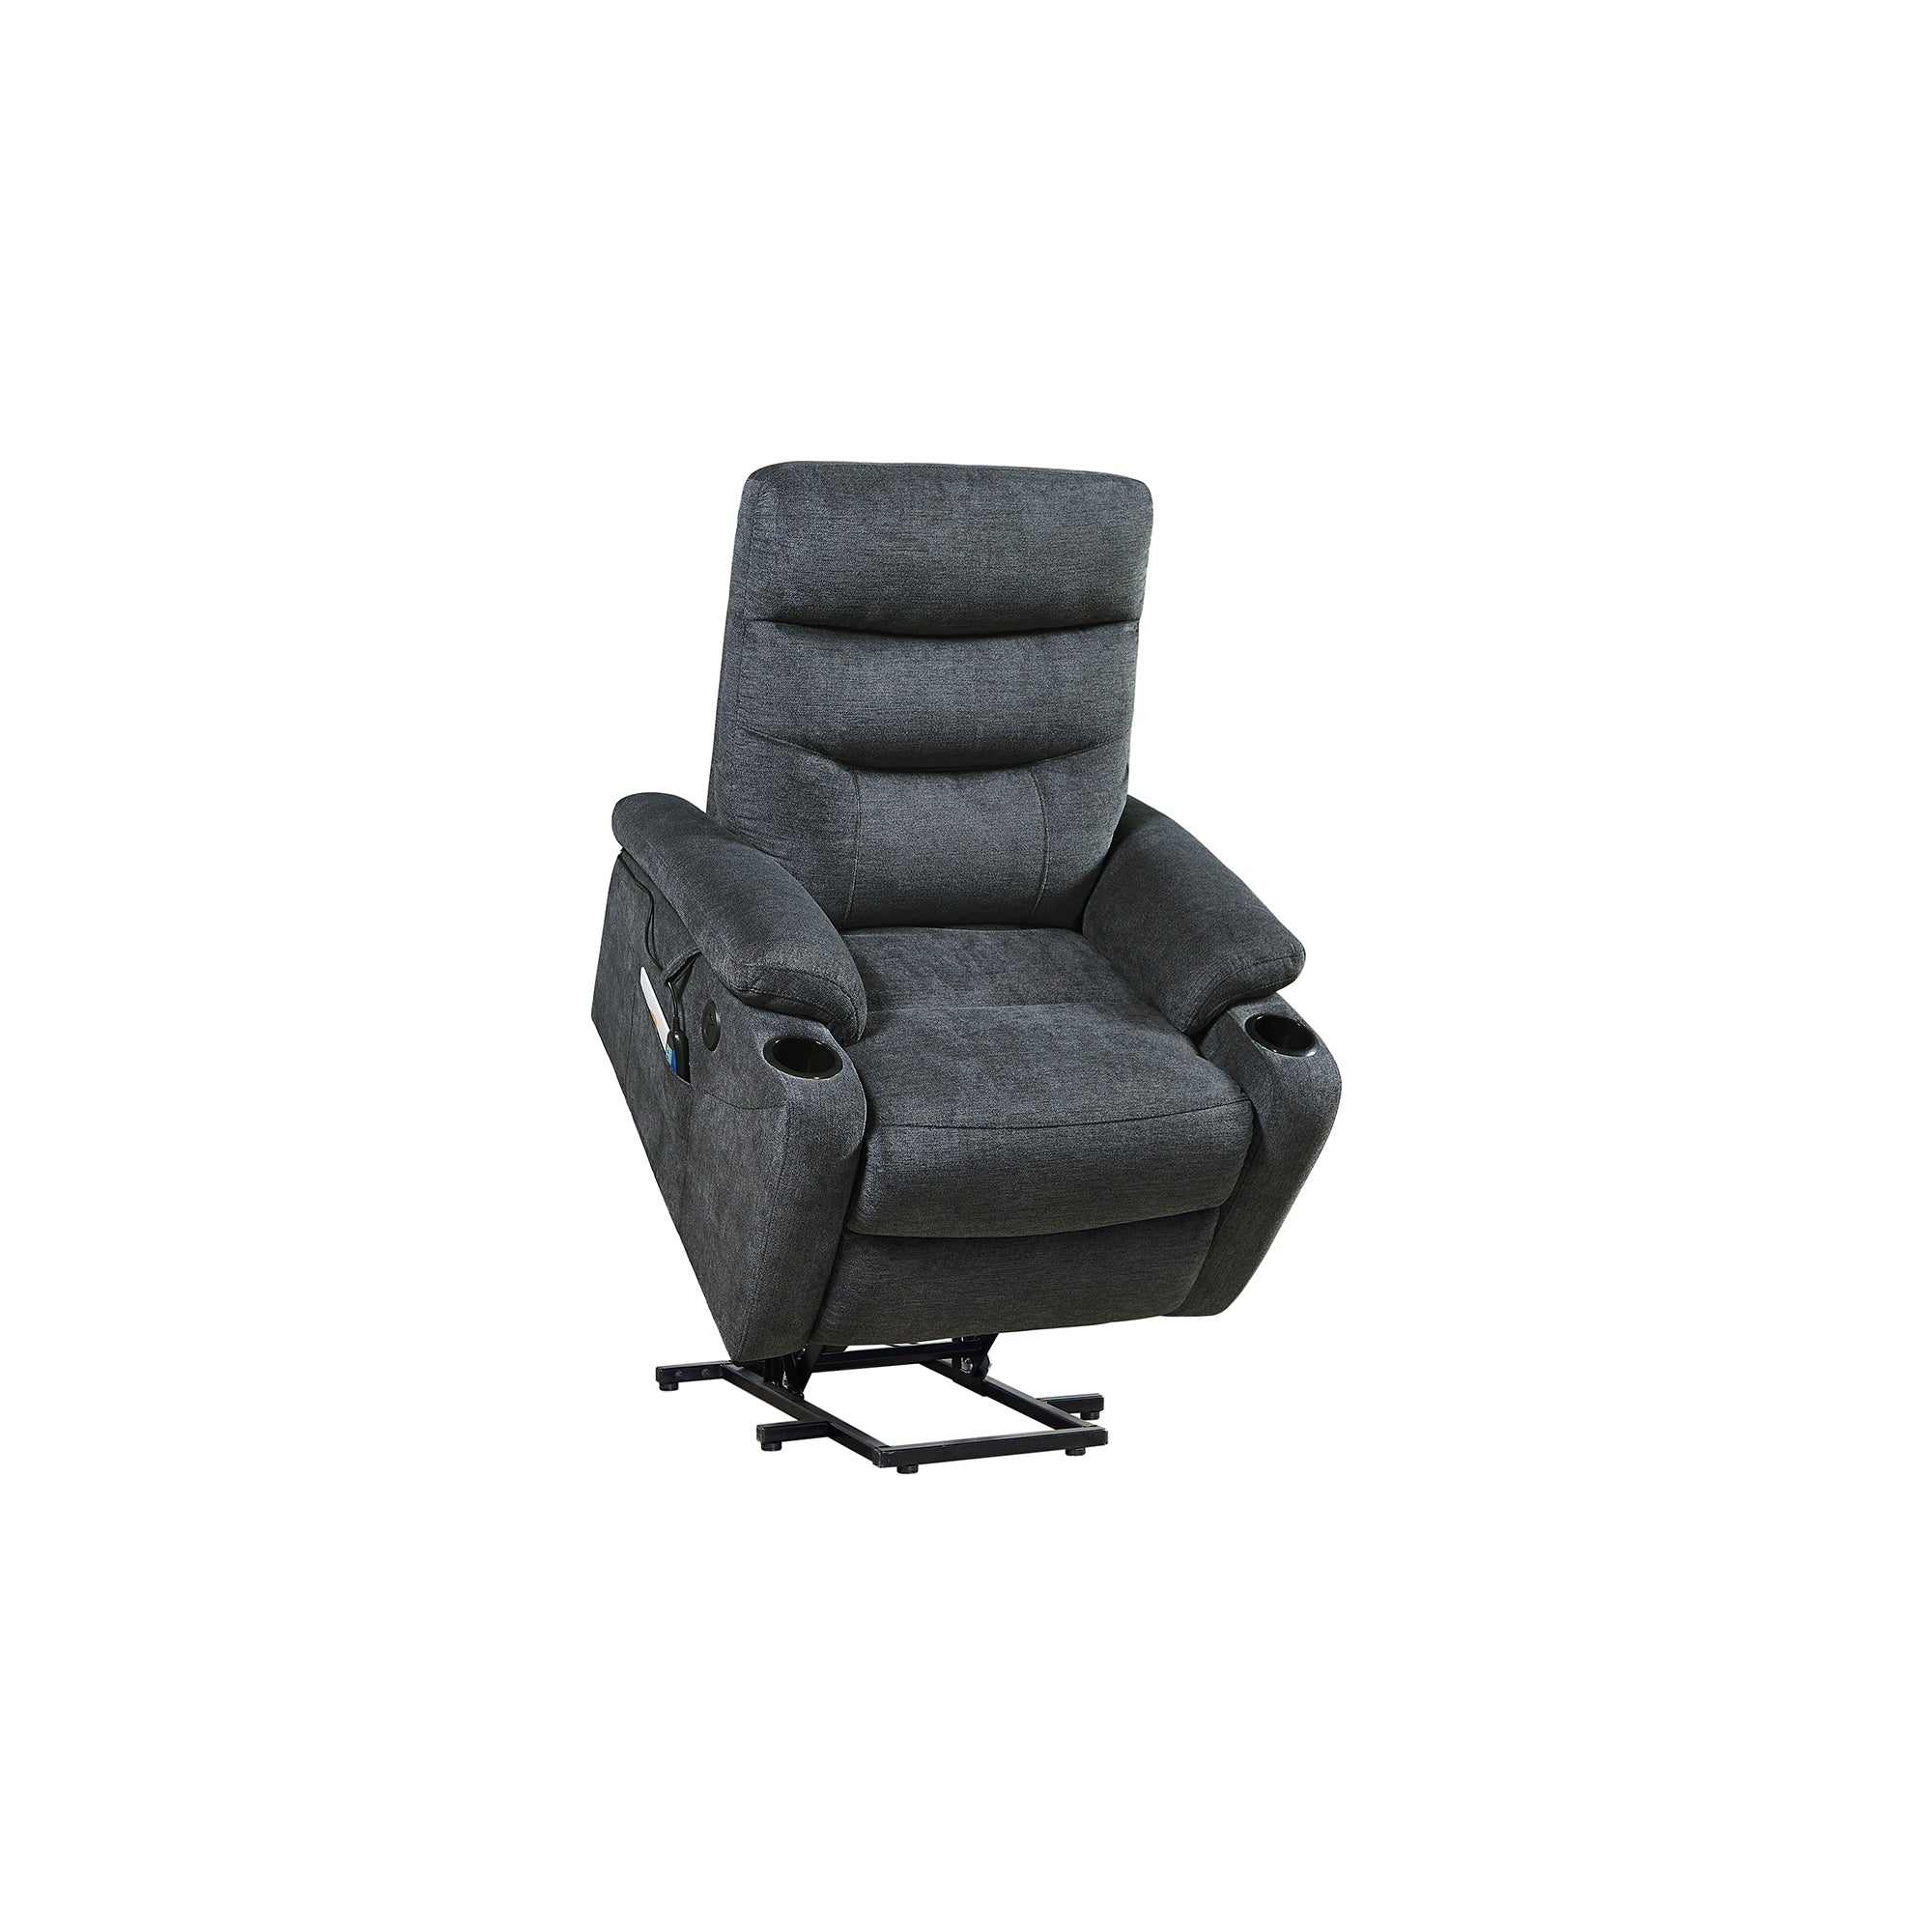 Liyasi Electric Power Lift Recliner with USB Charging Port